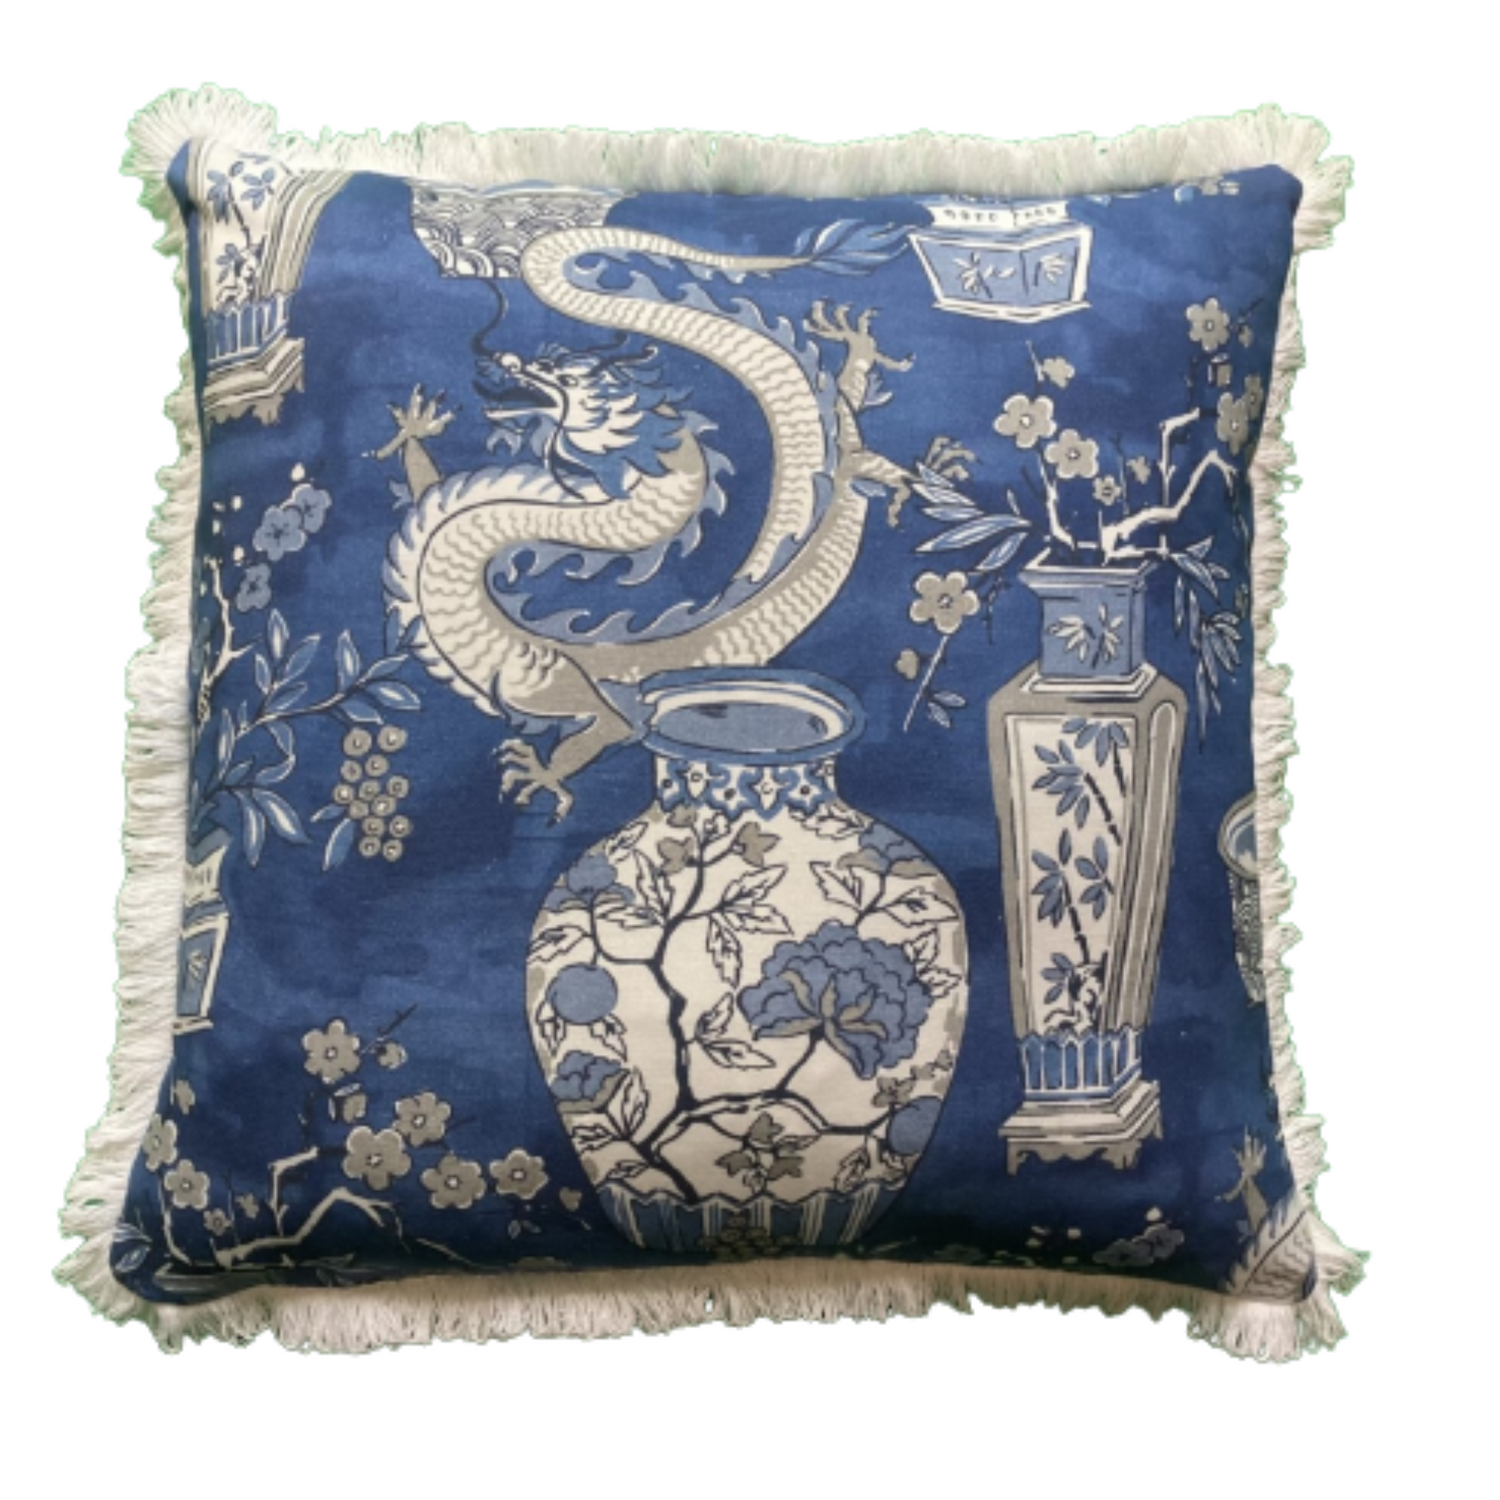 Chinoiserie Blue Ming Dynasty Jars and Dragons 21 X 21 Square Designer Pillow with Down Feather Insert